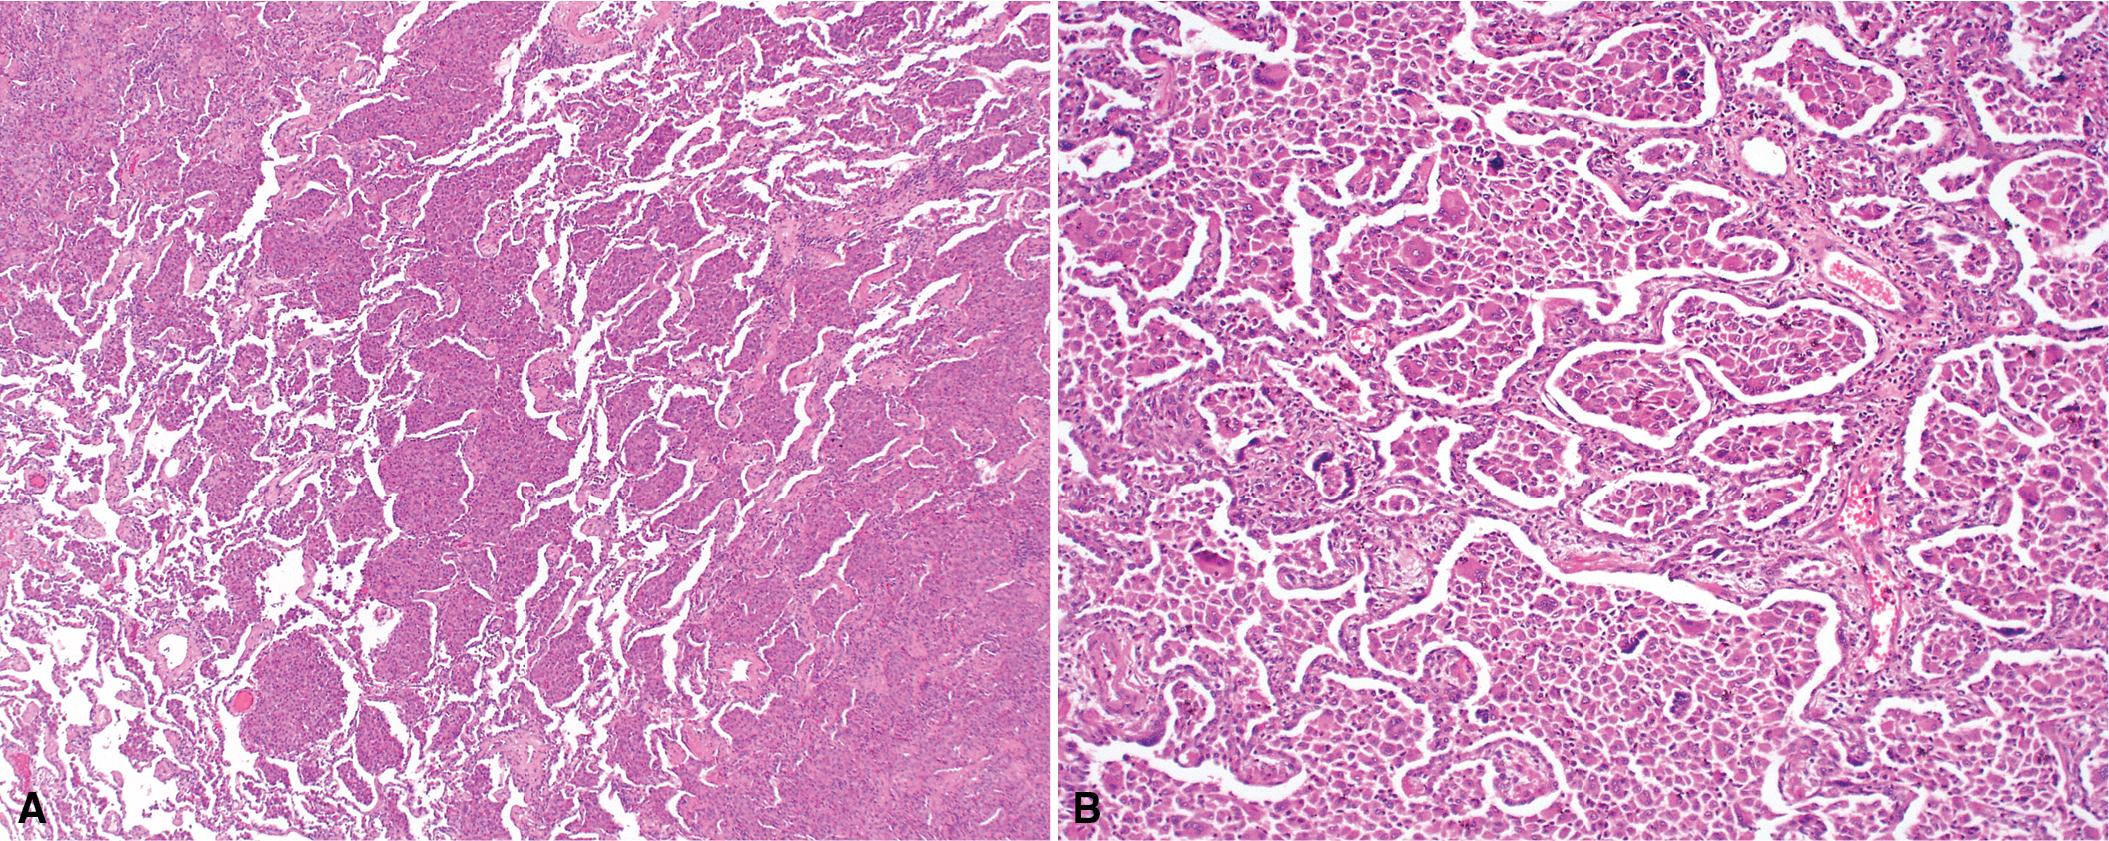 Figure 8.28, Desquamative interstitial pneumonia (DIP). (A) DIP is often a scanning magnification diagnosis. (B) The surgical lung biopsy has an eosinophilic appearance owing to the presence of eosinophilic macrophages uniformly filling airspaces.